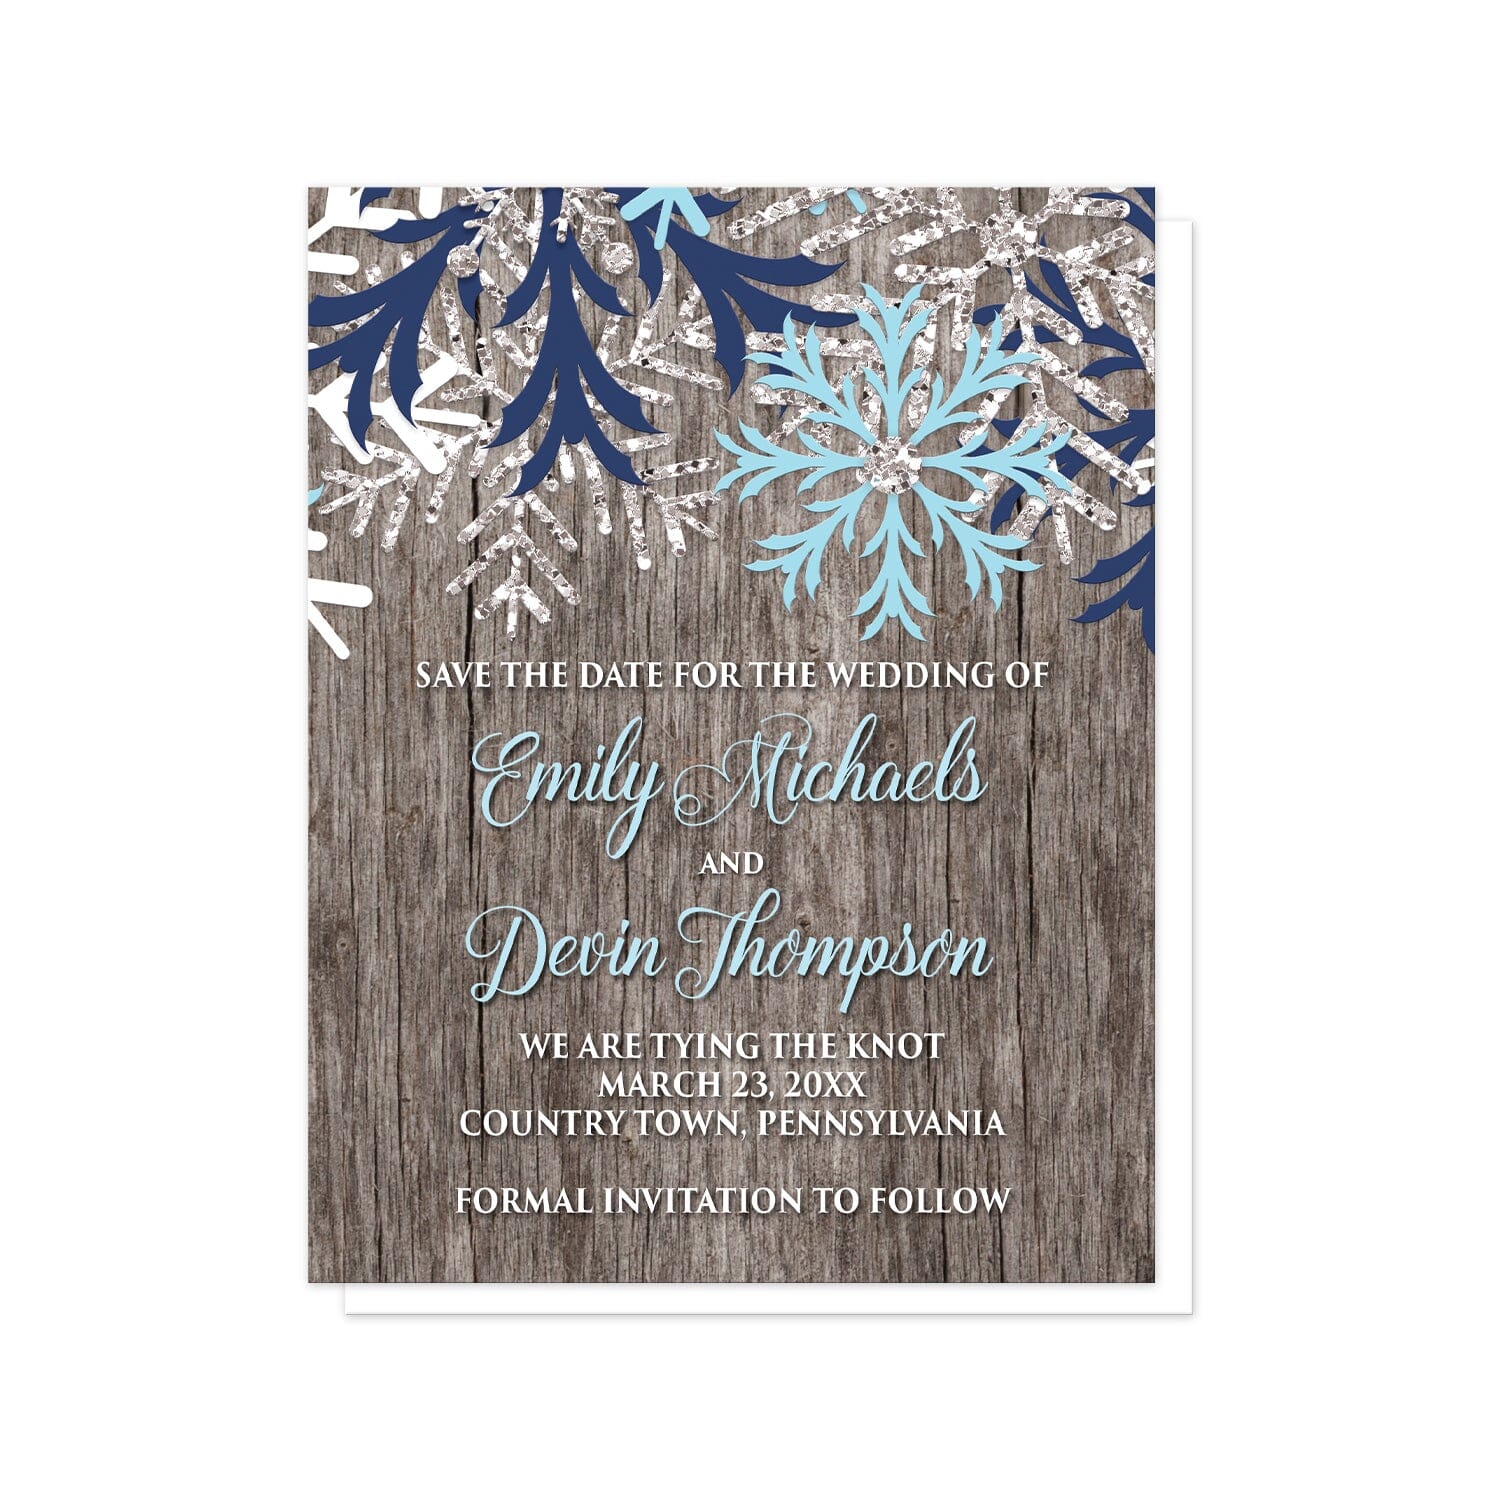 Rustic Winter Wood Navy Aqua Snowflake Save the Date Cards at Artistically Invited. Country-inspired rustic winter wood navy aqua snowflake save the date cards designed with light aqua blue, navy blue, white, and silver-colored glitter-illustrated snowflakes along the top over a rustic wood pattern illustration. Your personalized wedding date details are custom printed in aqua blue and white over the wood background below the snowflakes.